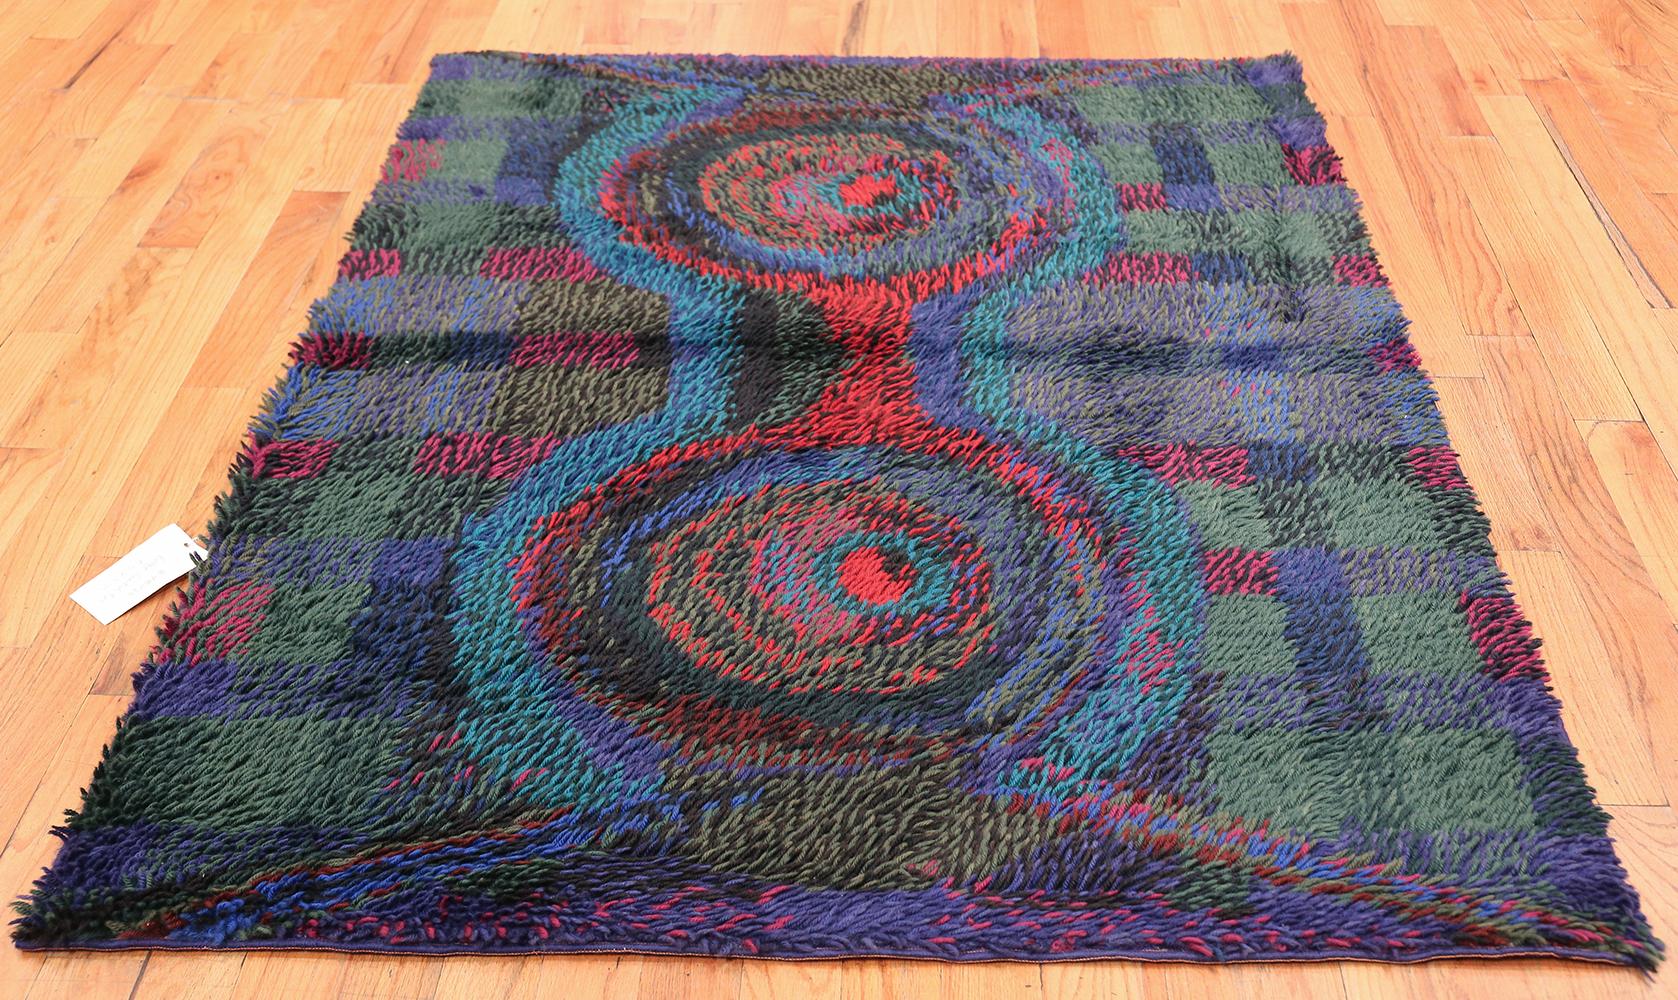 Vintage Scandinavian Rya Shag Rug, Origin: Scandinavia, Artist: Ritva Puotila, Circa: Mid 20th century. Size: 4 ft 5 in x 5 ft 10 in (1.35 m x 1.78 m)

Here is a highly unique and intriguing vintage carpet - a vintage Rya rug that was woven in